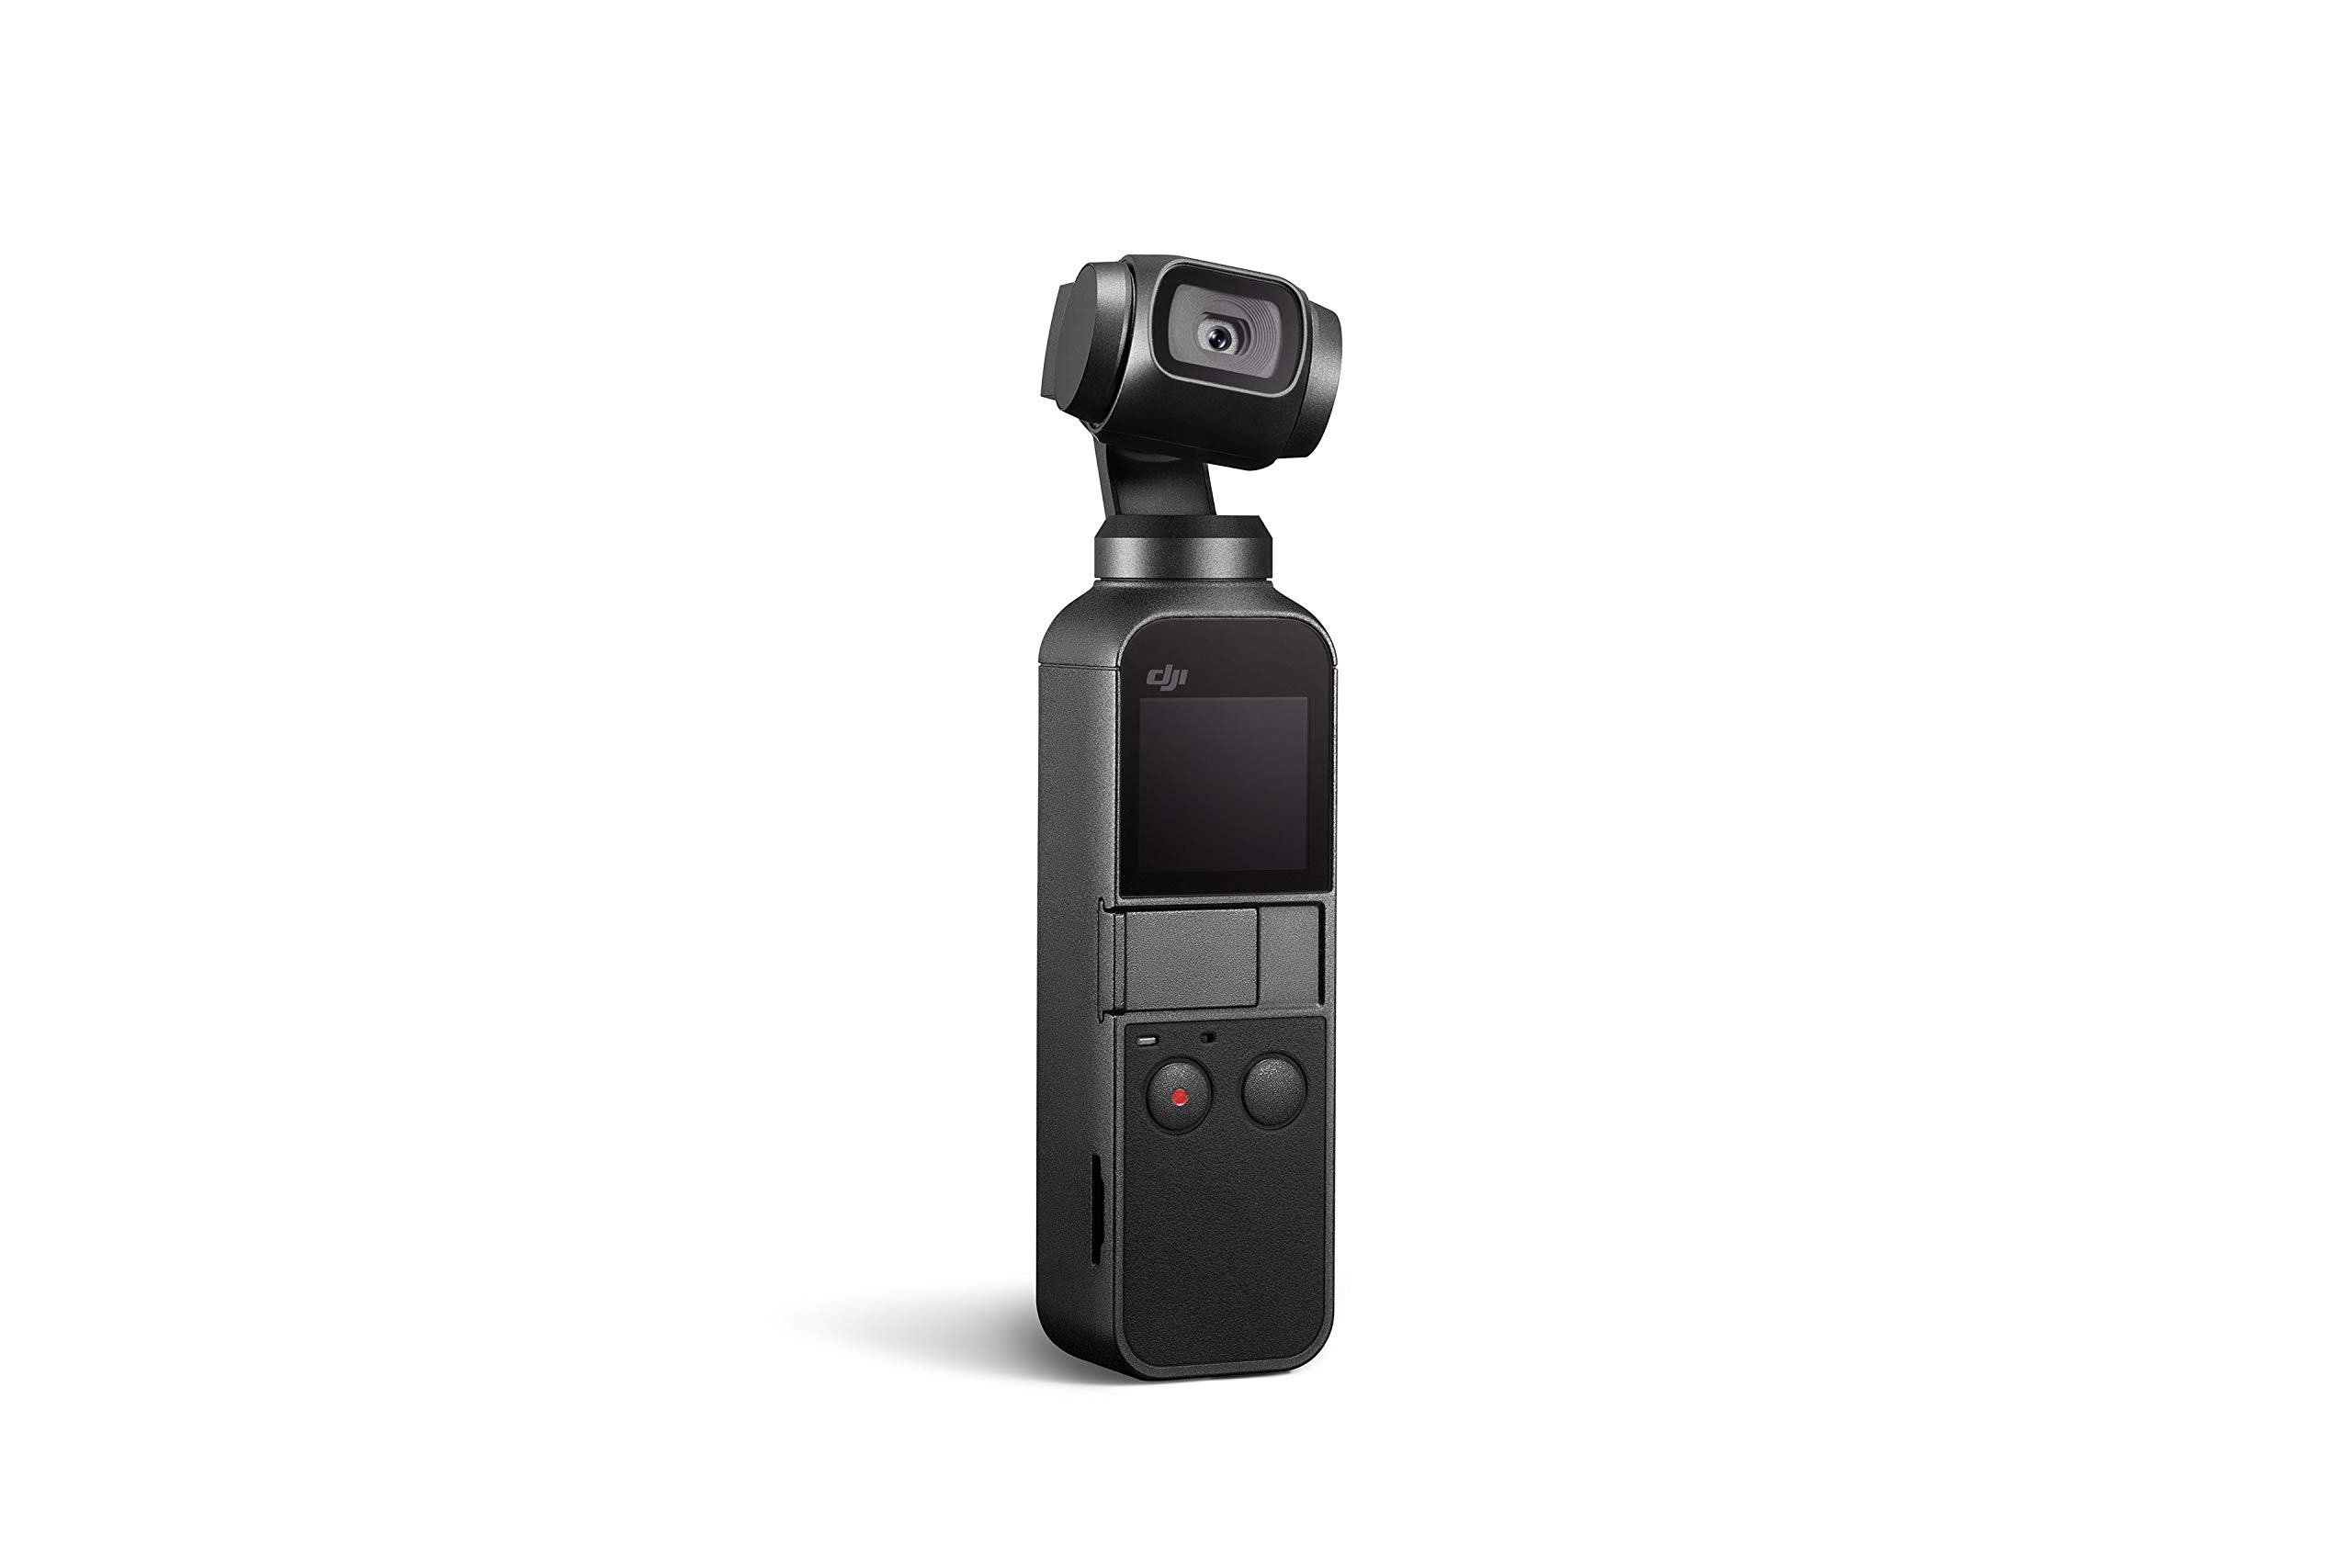 DJI Osmo Pocket - Handheld 3-Axis Gimbal Stabilizer with Integrated Camera 12 MP 1/2.3” CMOS 4K Video